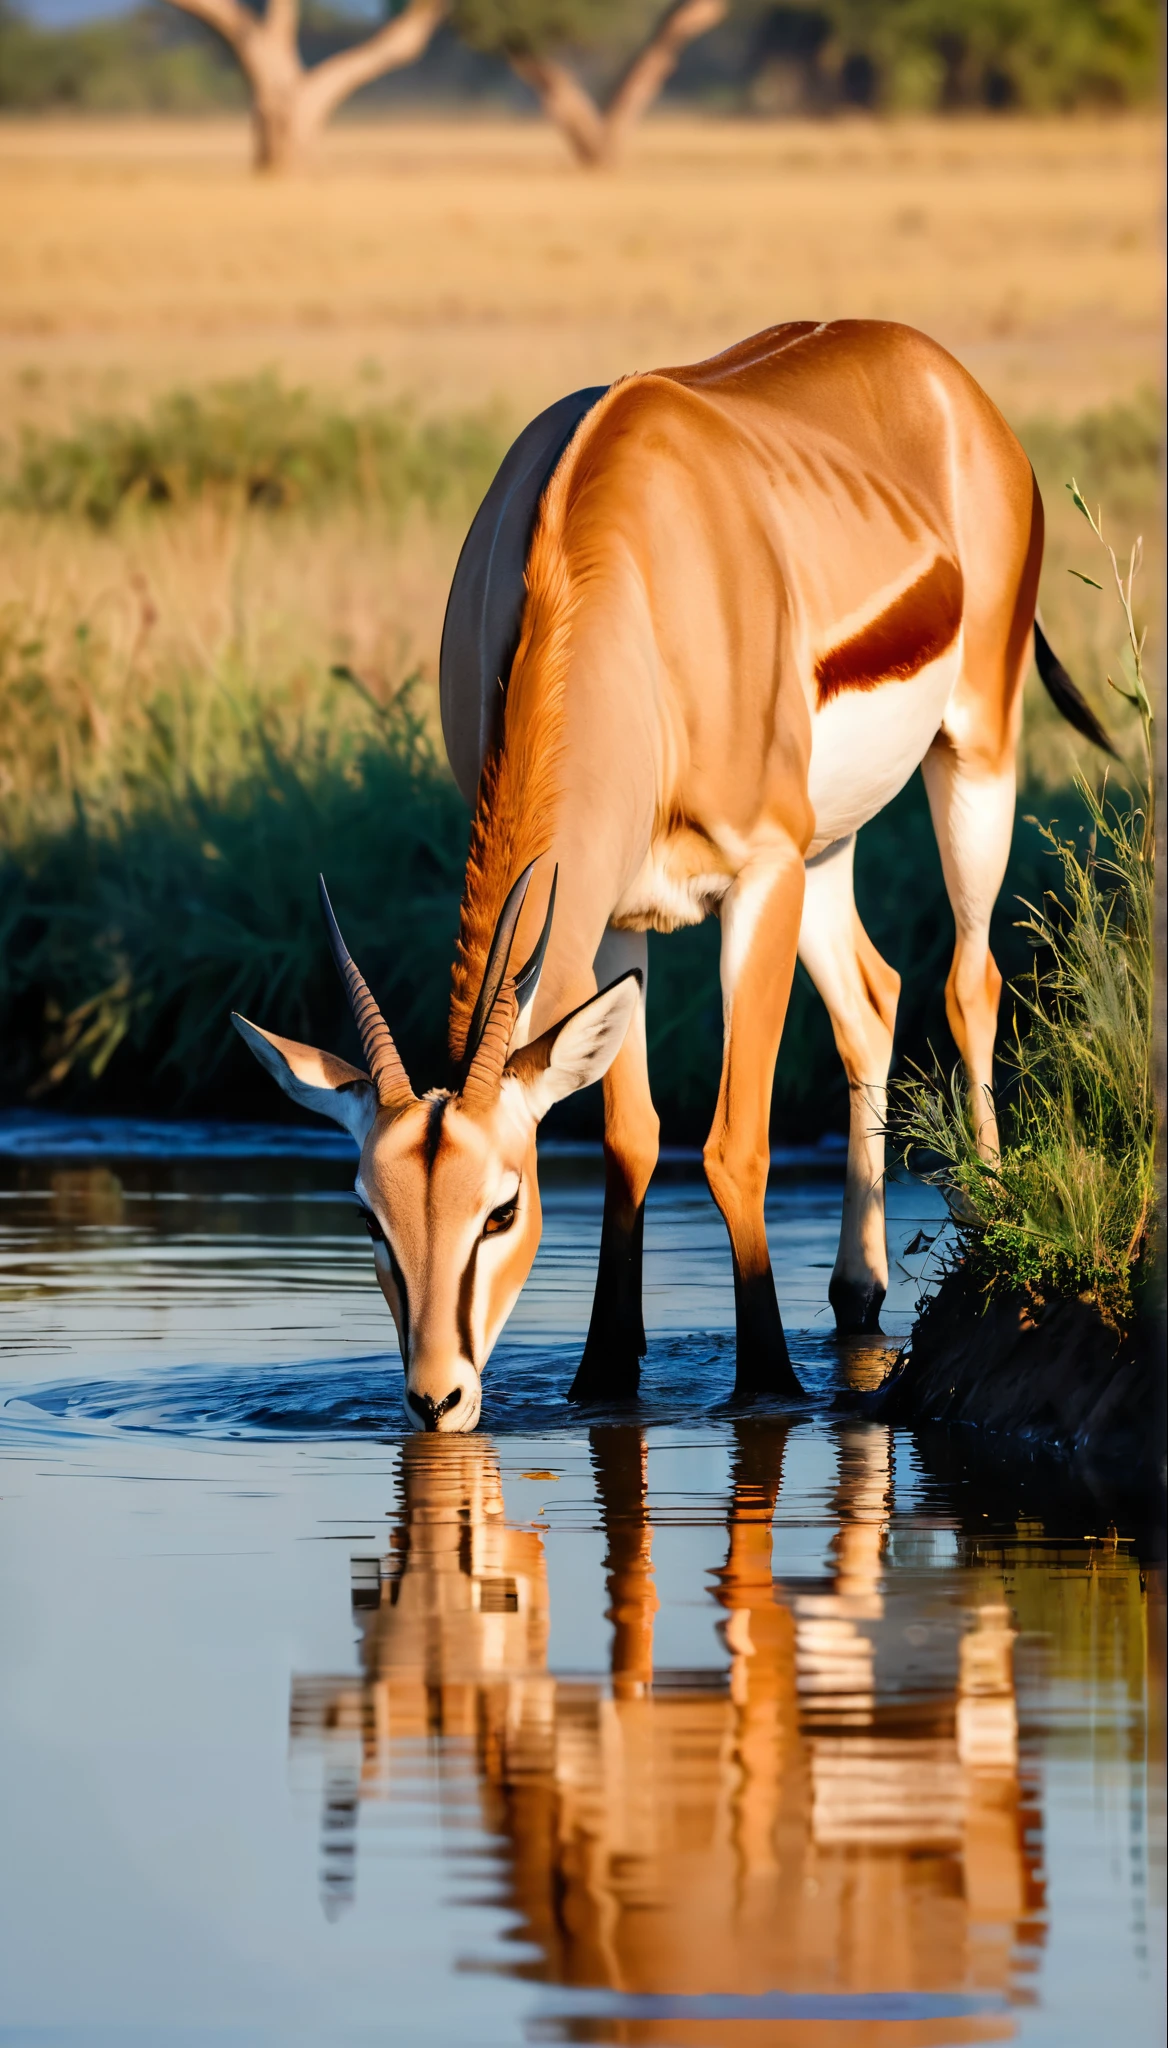 (best quality, realistic, raw, highres), African wildlife, animal photography, wild African steppe, gazelle drinking water by the river, lurking crocodile, fleeting moment, intense predator-prey interaction, precise capture, remarkable details, powerful composition, vibrant colors, natural lighting